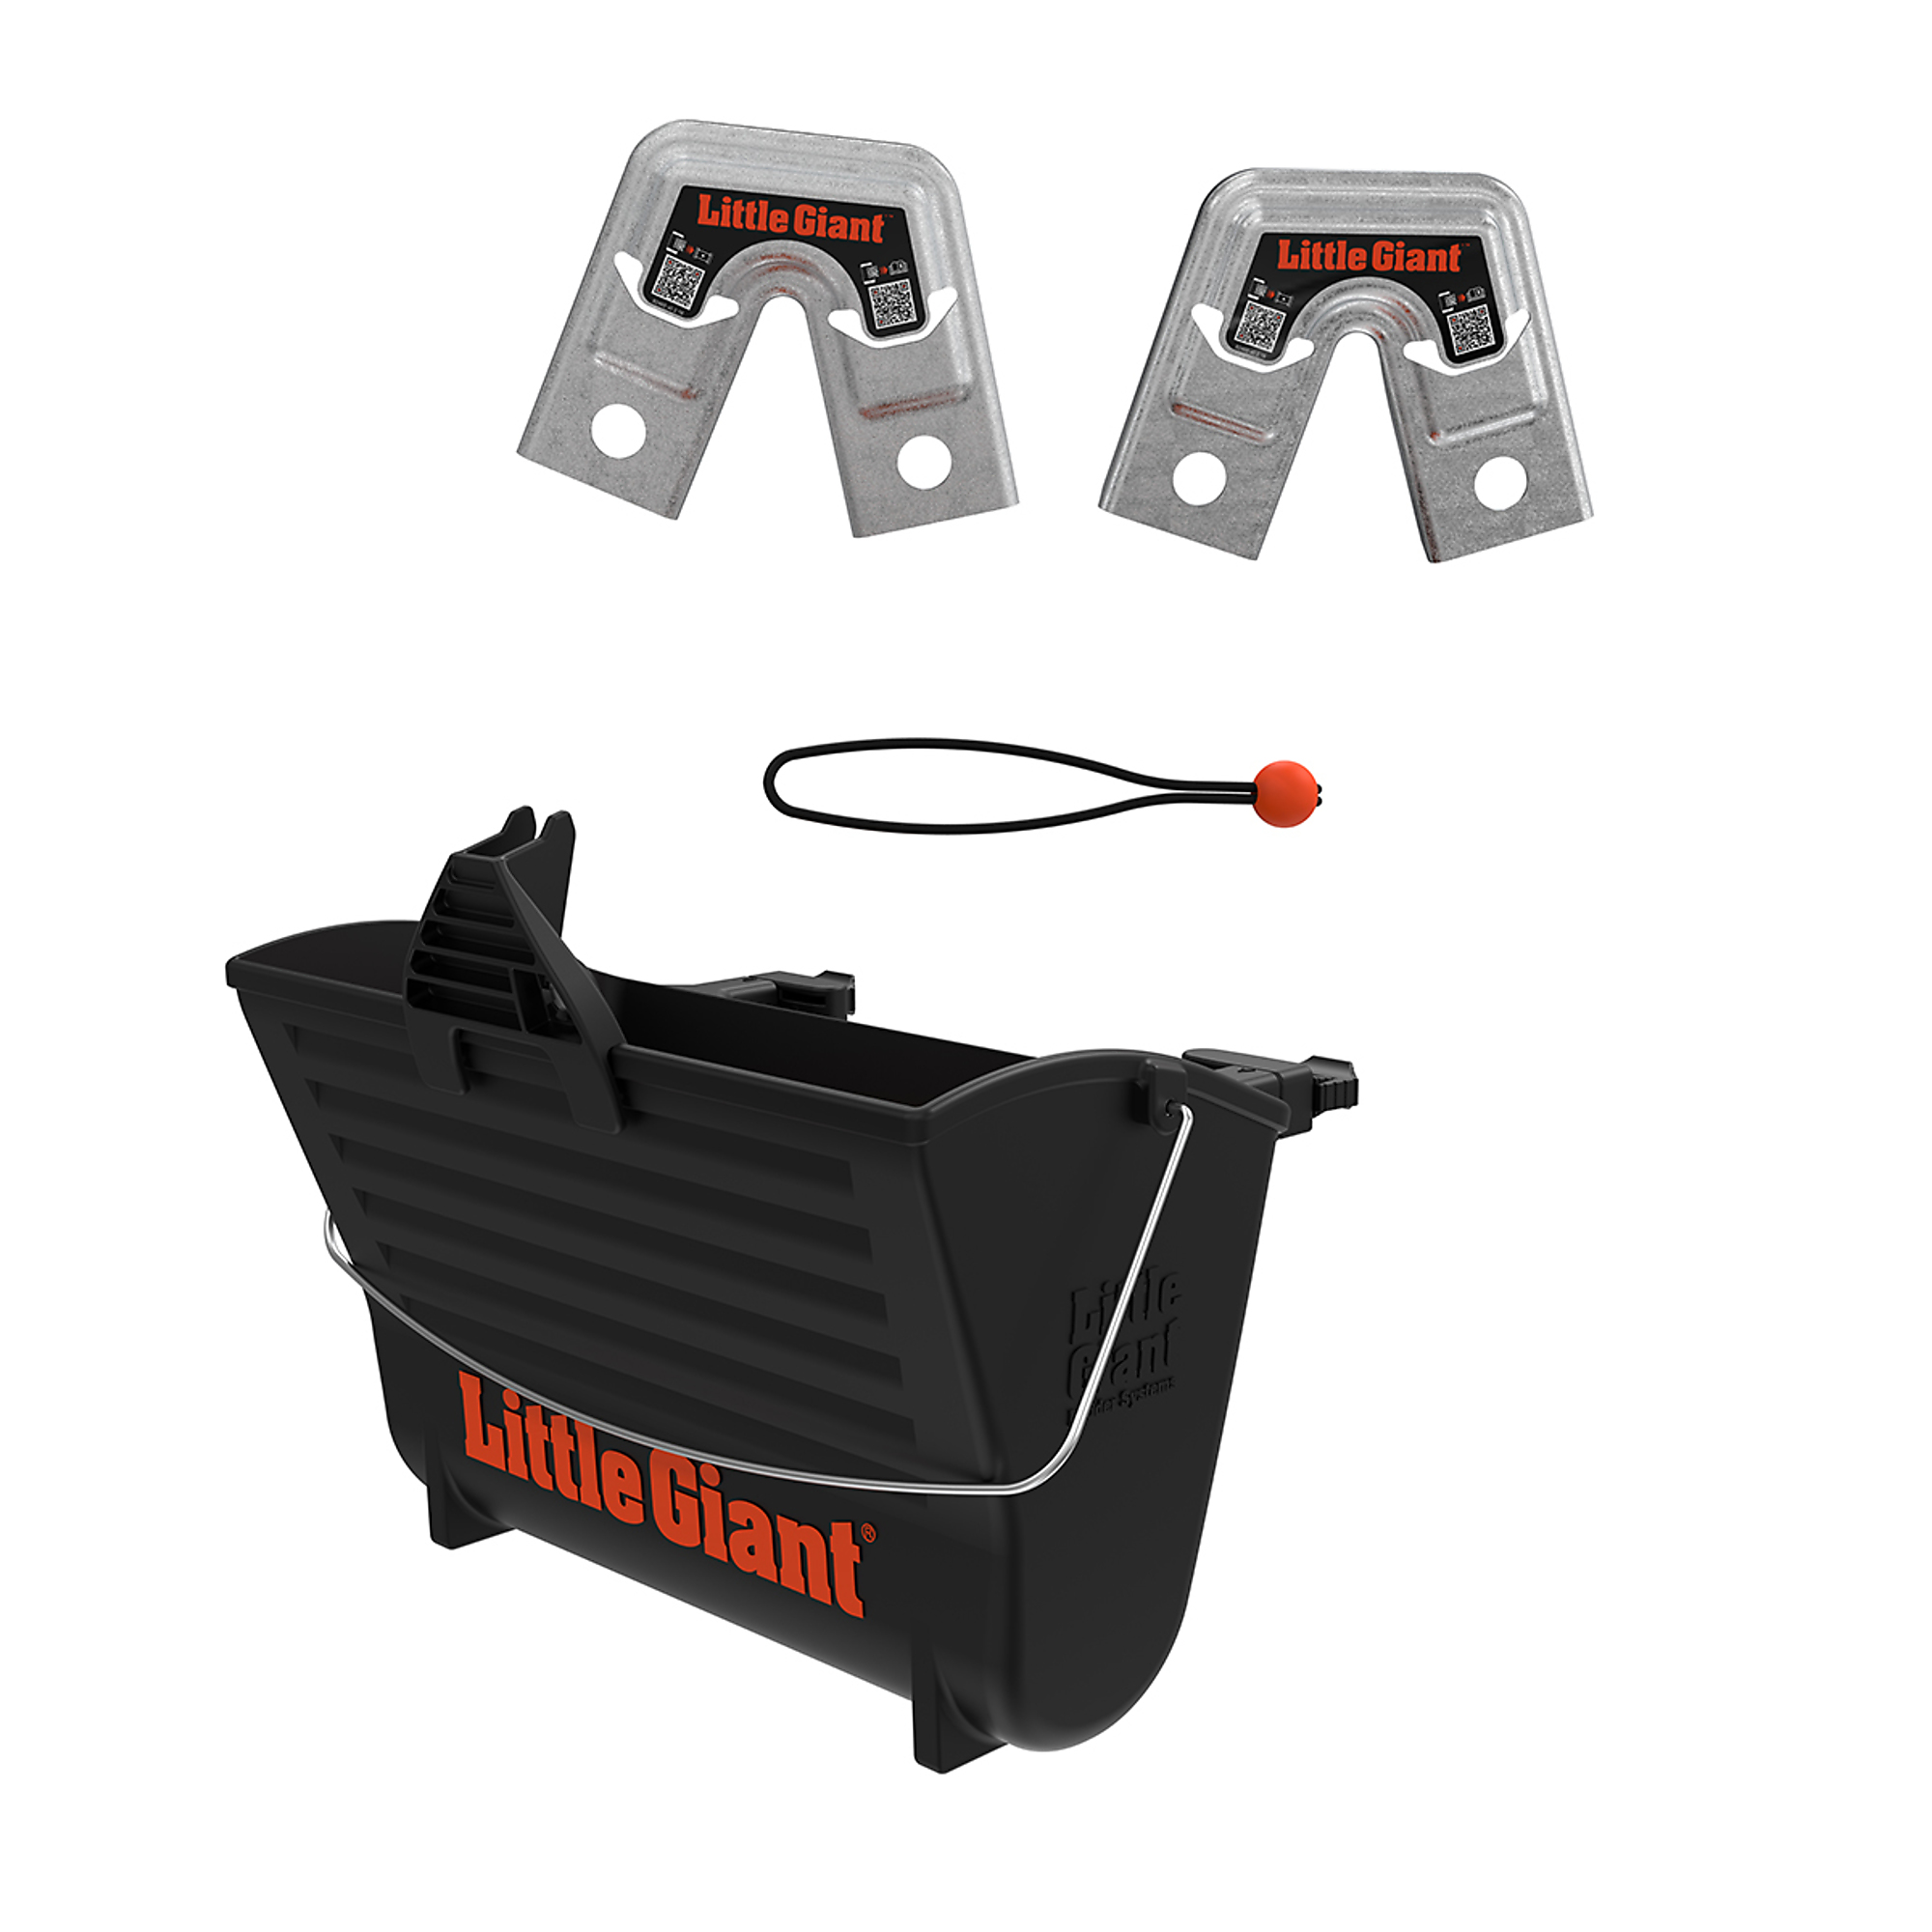 Little Giant Ladder, Accessory Pack: Fuel Tank and Trestle Brackets, Height 10.5 ft, Material Molded Plastic, Model 18960-001